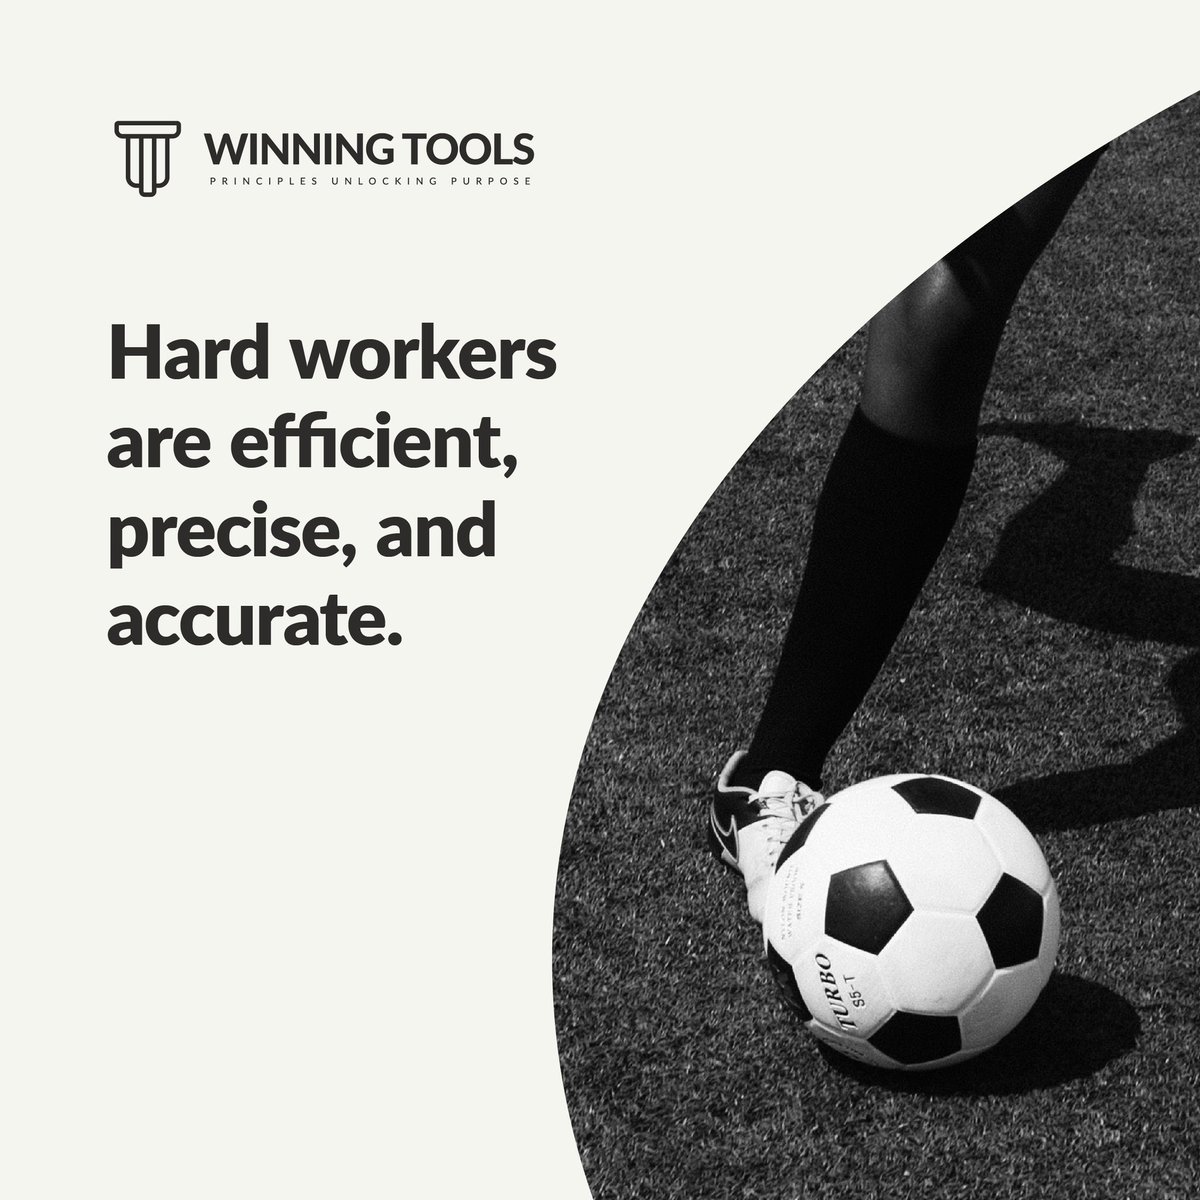 Efficiently manage your tasks.

Precisely manage your time.

Accurately manage your team.

#winningtools #leadershipinspiration